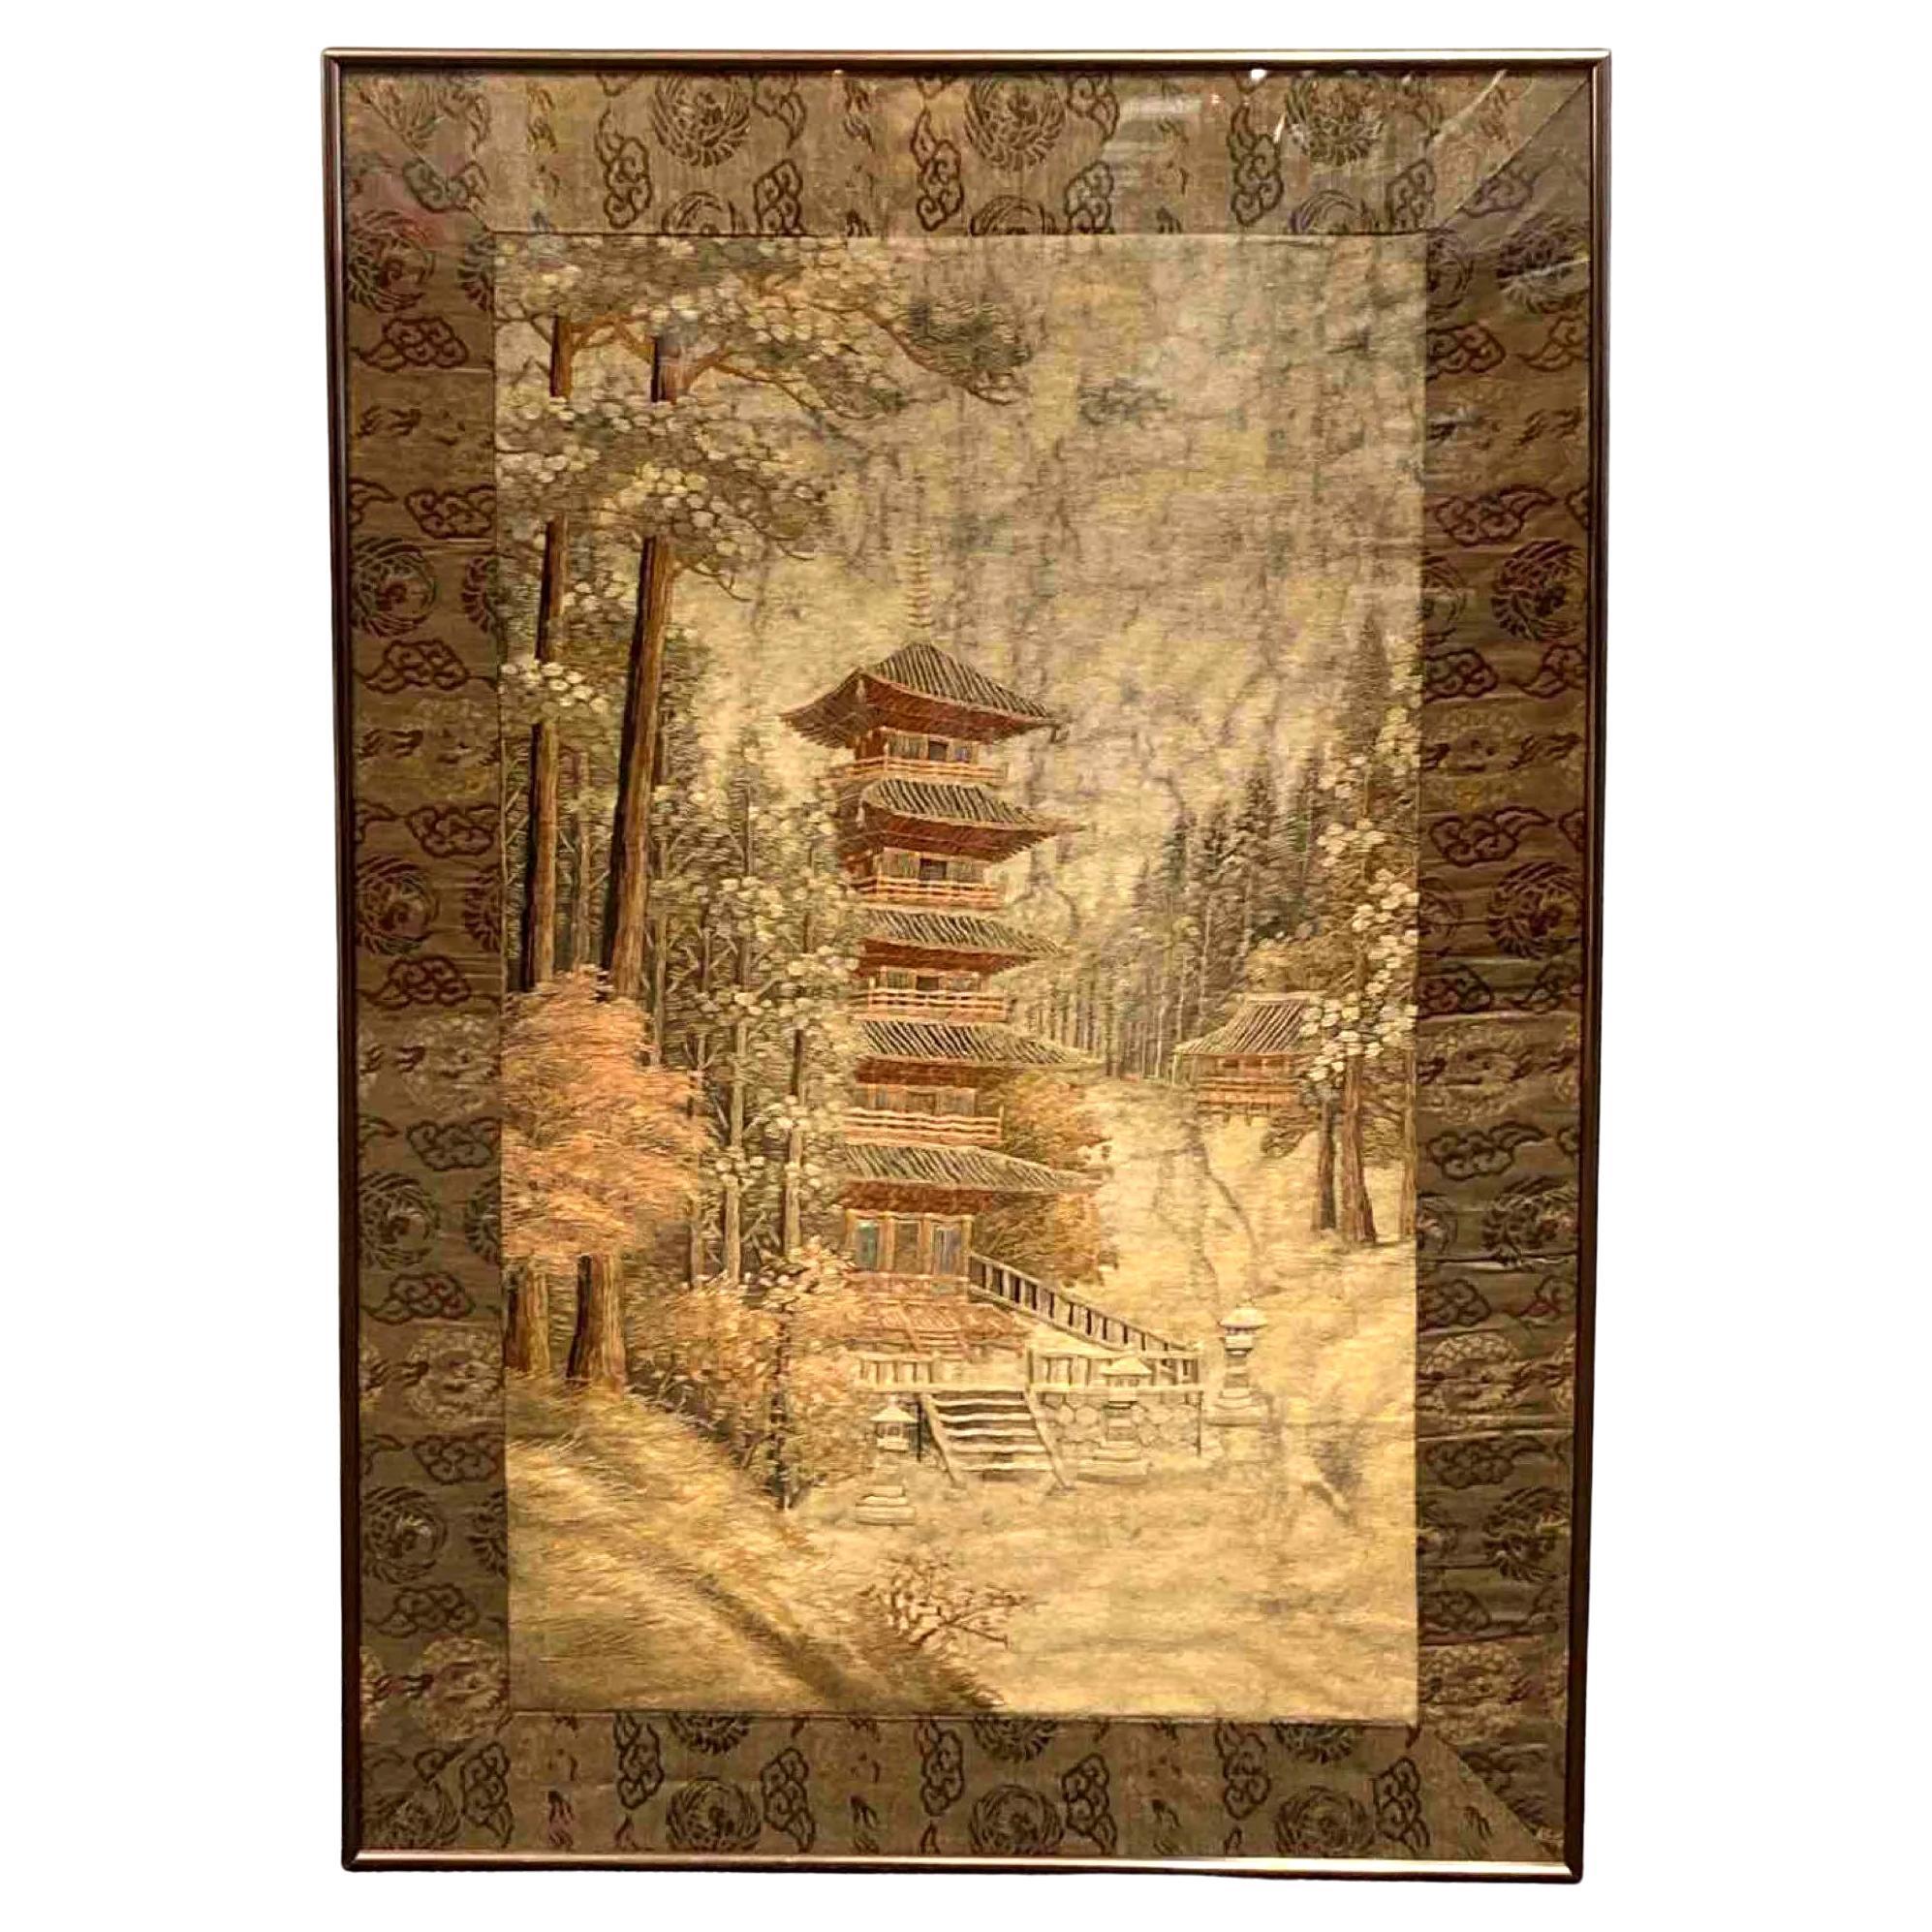 A Japanese silk embroidery landscape scenery panel depicting a Buddhist pagoda and a temple compound set in a forest with towering pines and red maple trees. This type of pictorial panels was made mostly in the early 20th century (1910-20s) toward